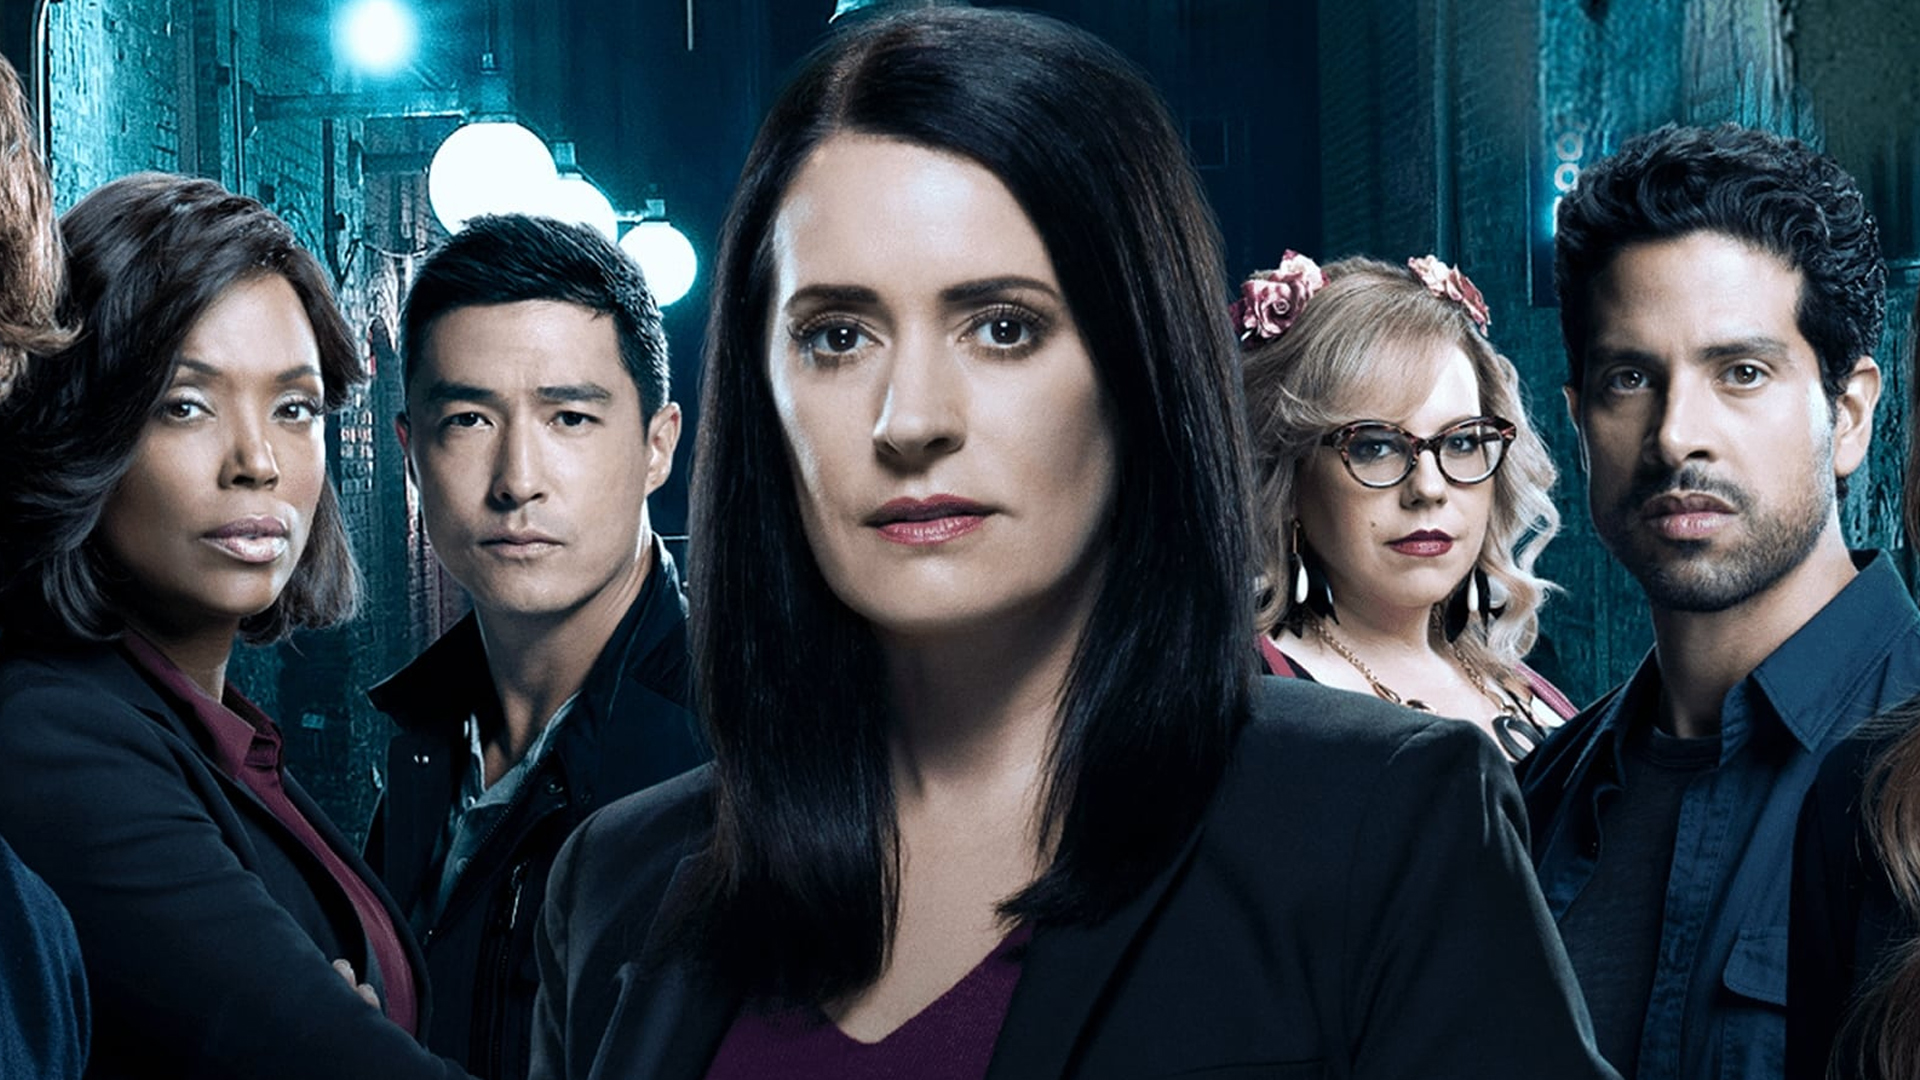 7 Most Popular Criminal Minds Characters, Ranked by… TikTok